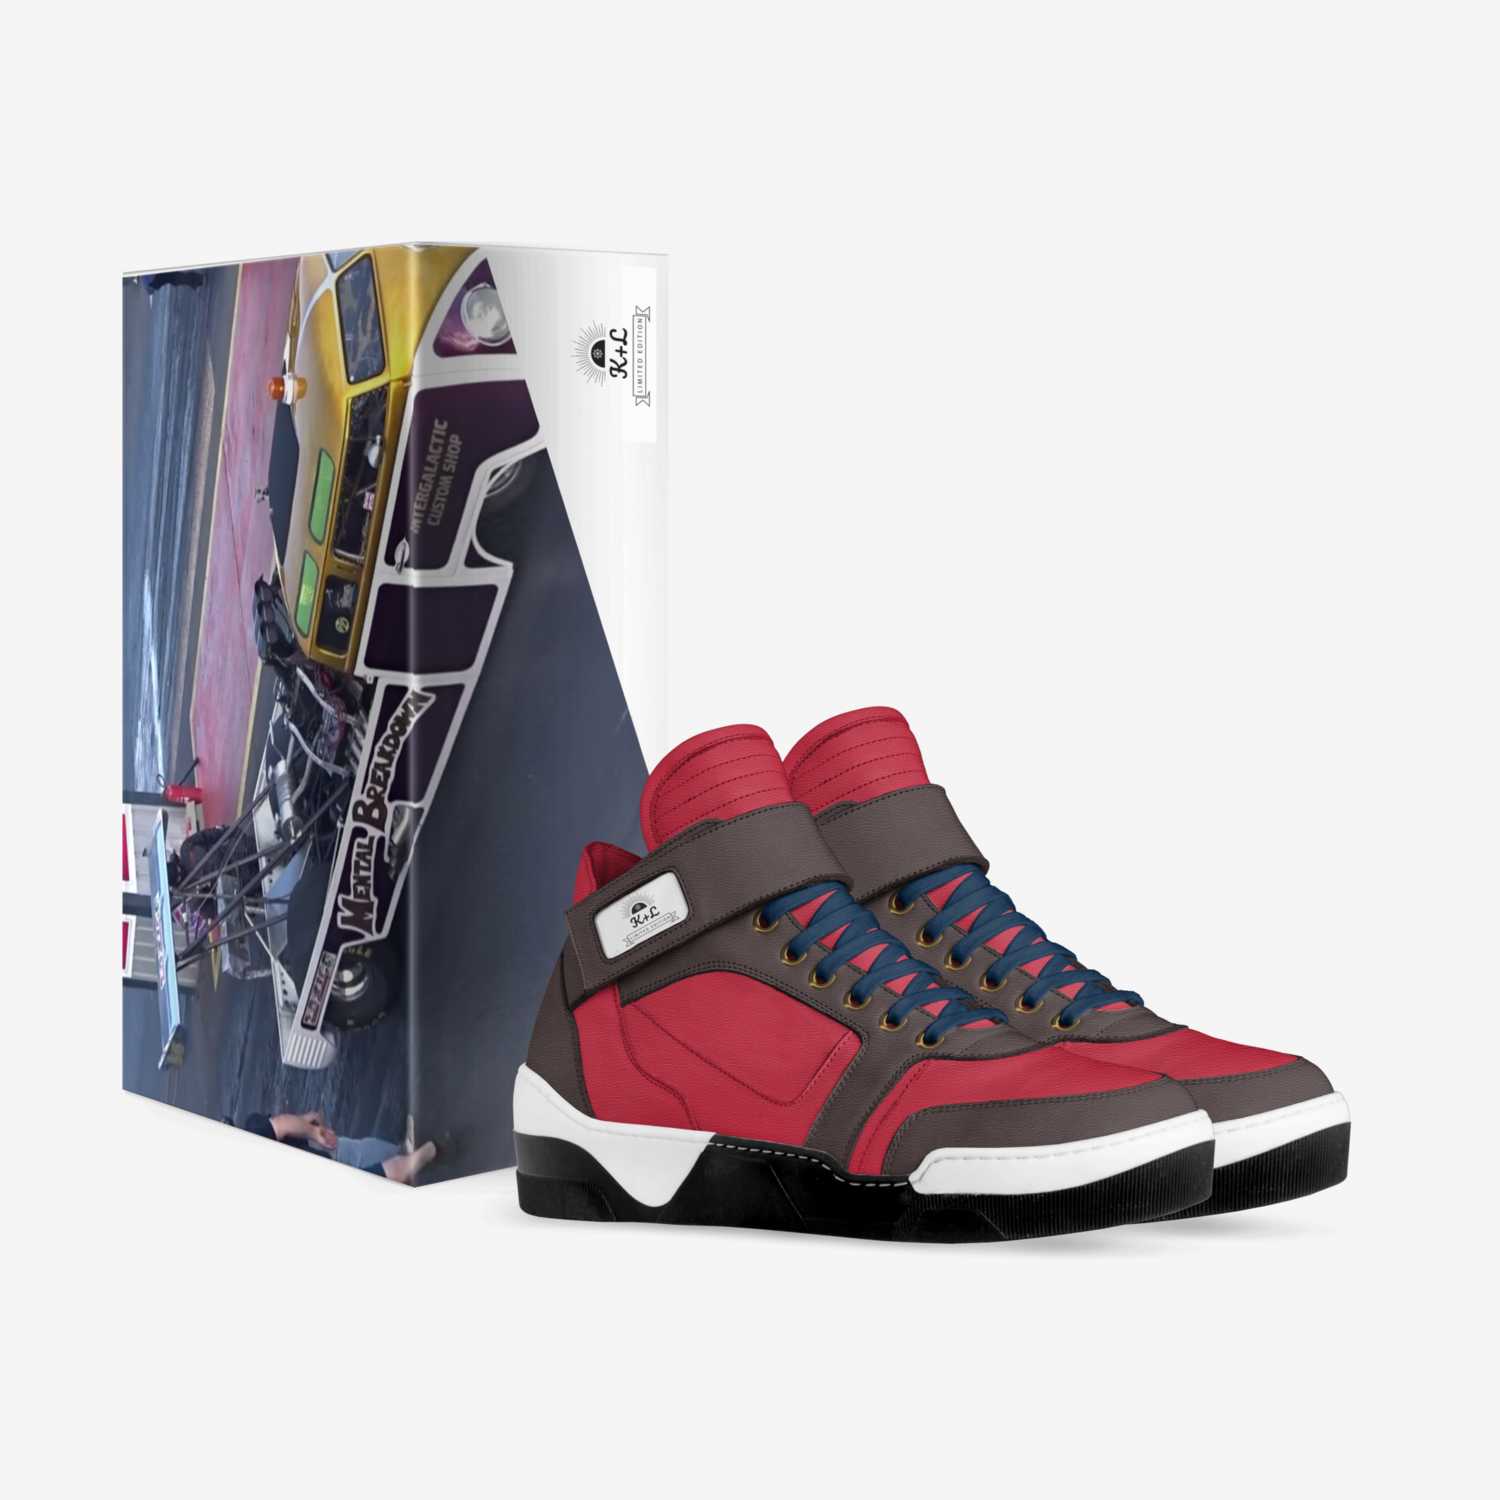 K+L custom made in Italy shoes by Leevy Ganzer | Box view